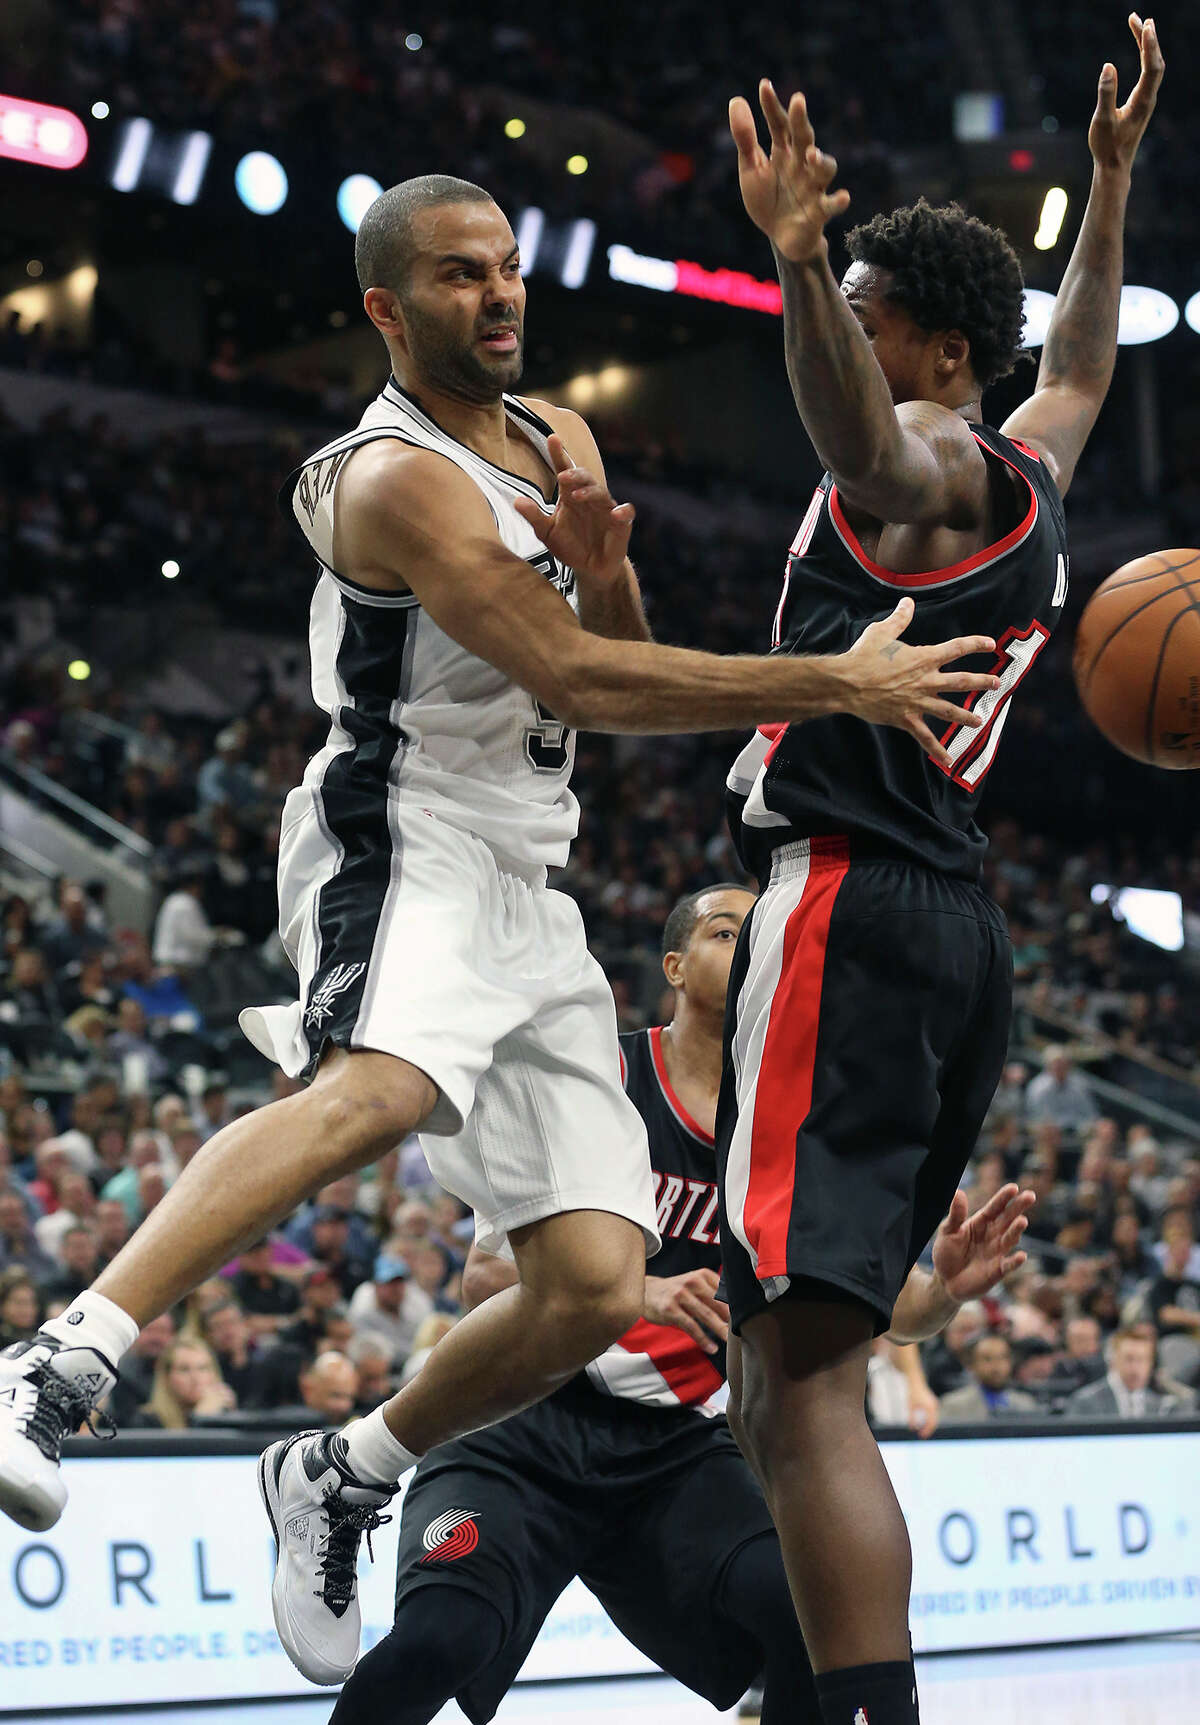 Tony Parker passes around Ed Davis as the Spurs host Portland at the AT&T Center on November 16, 2015.